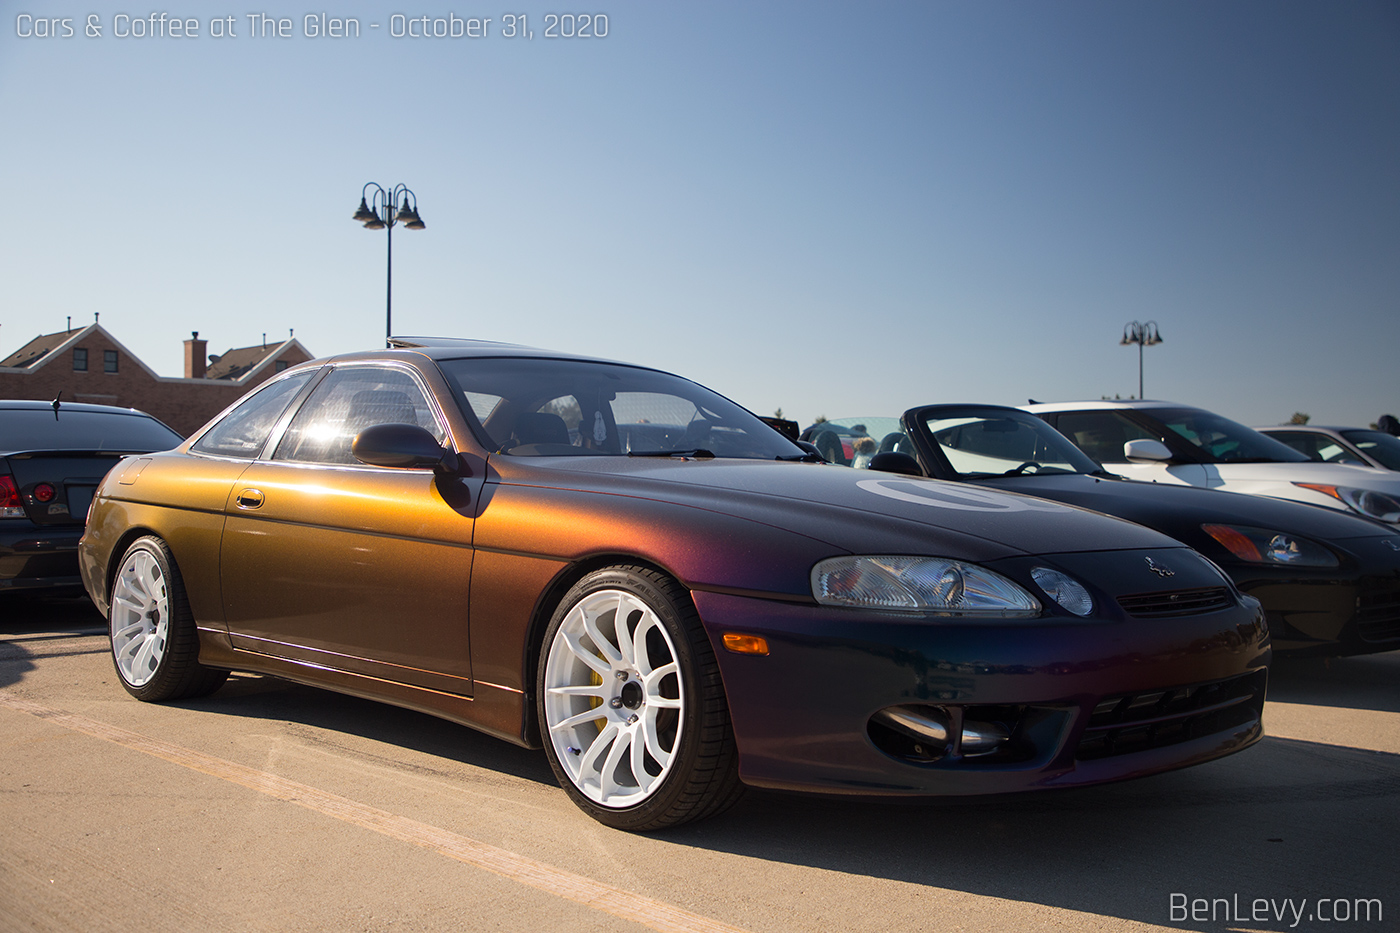 Toyota Soarer with color-shifting paint